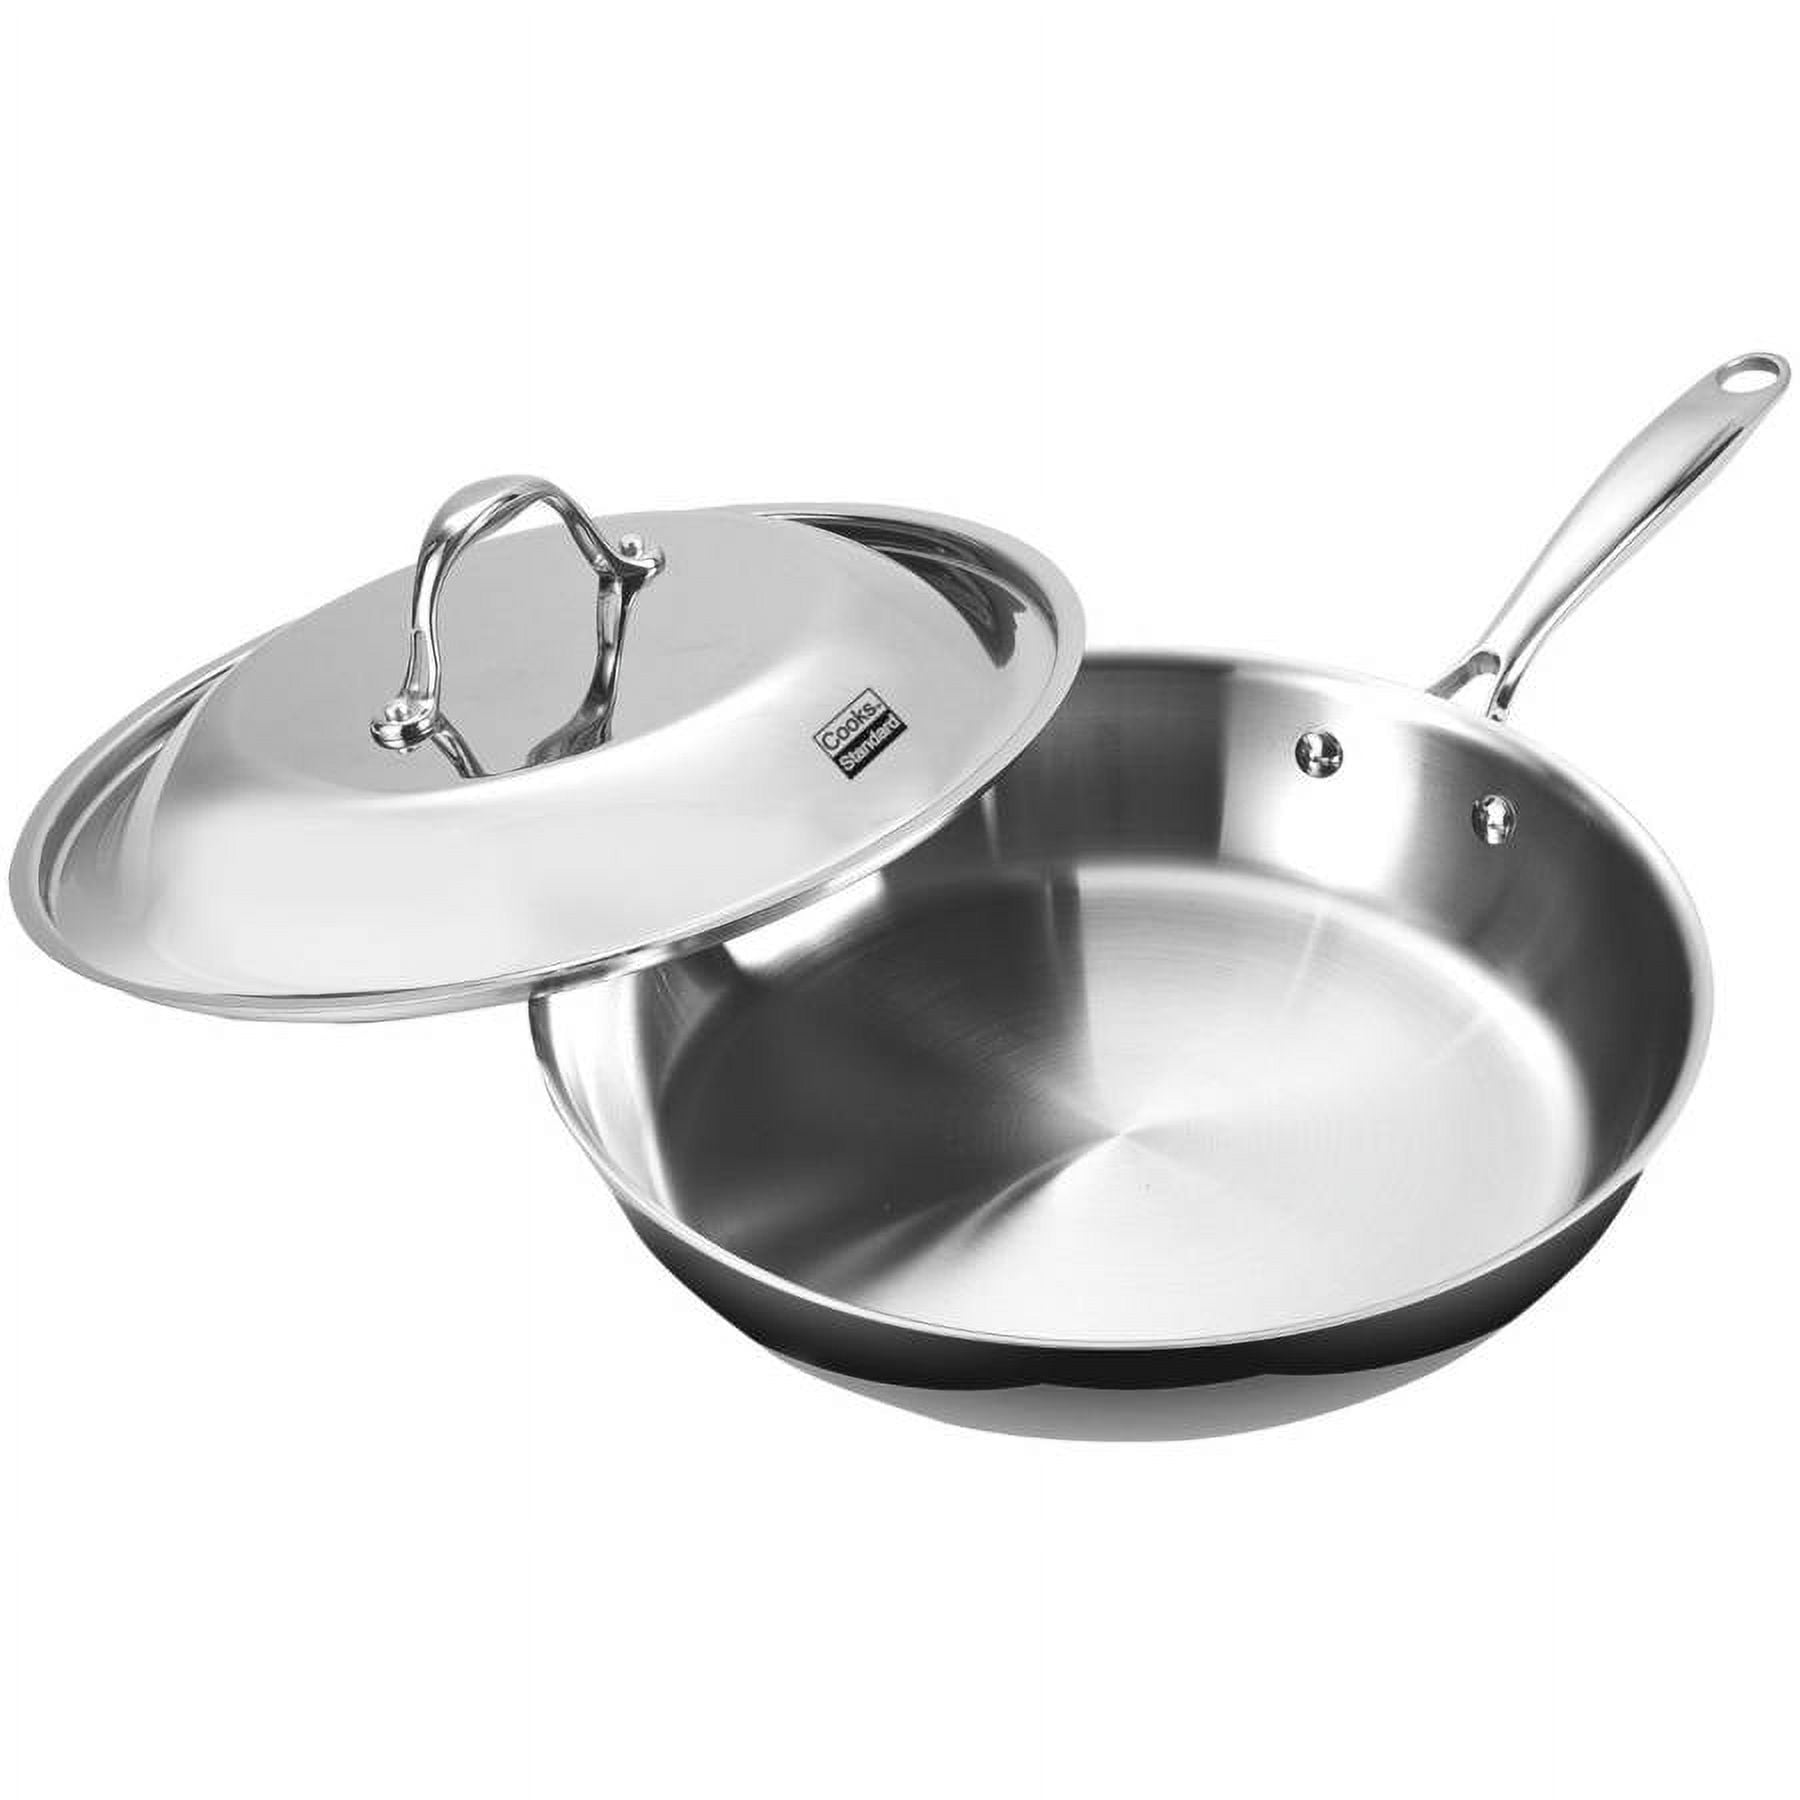 D5 Stainless Polished 5-Ply 12 Inch Skillet, 12 Inch Fry Pan